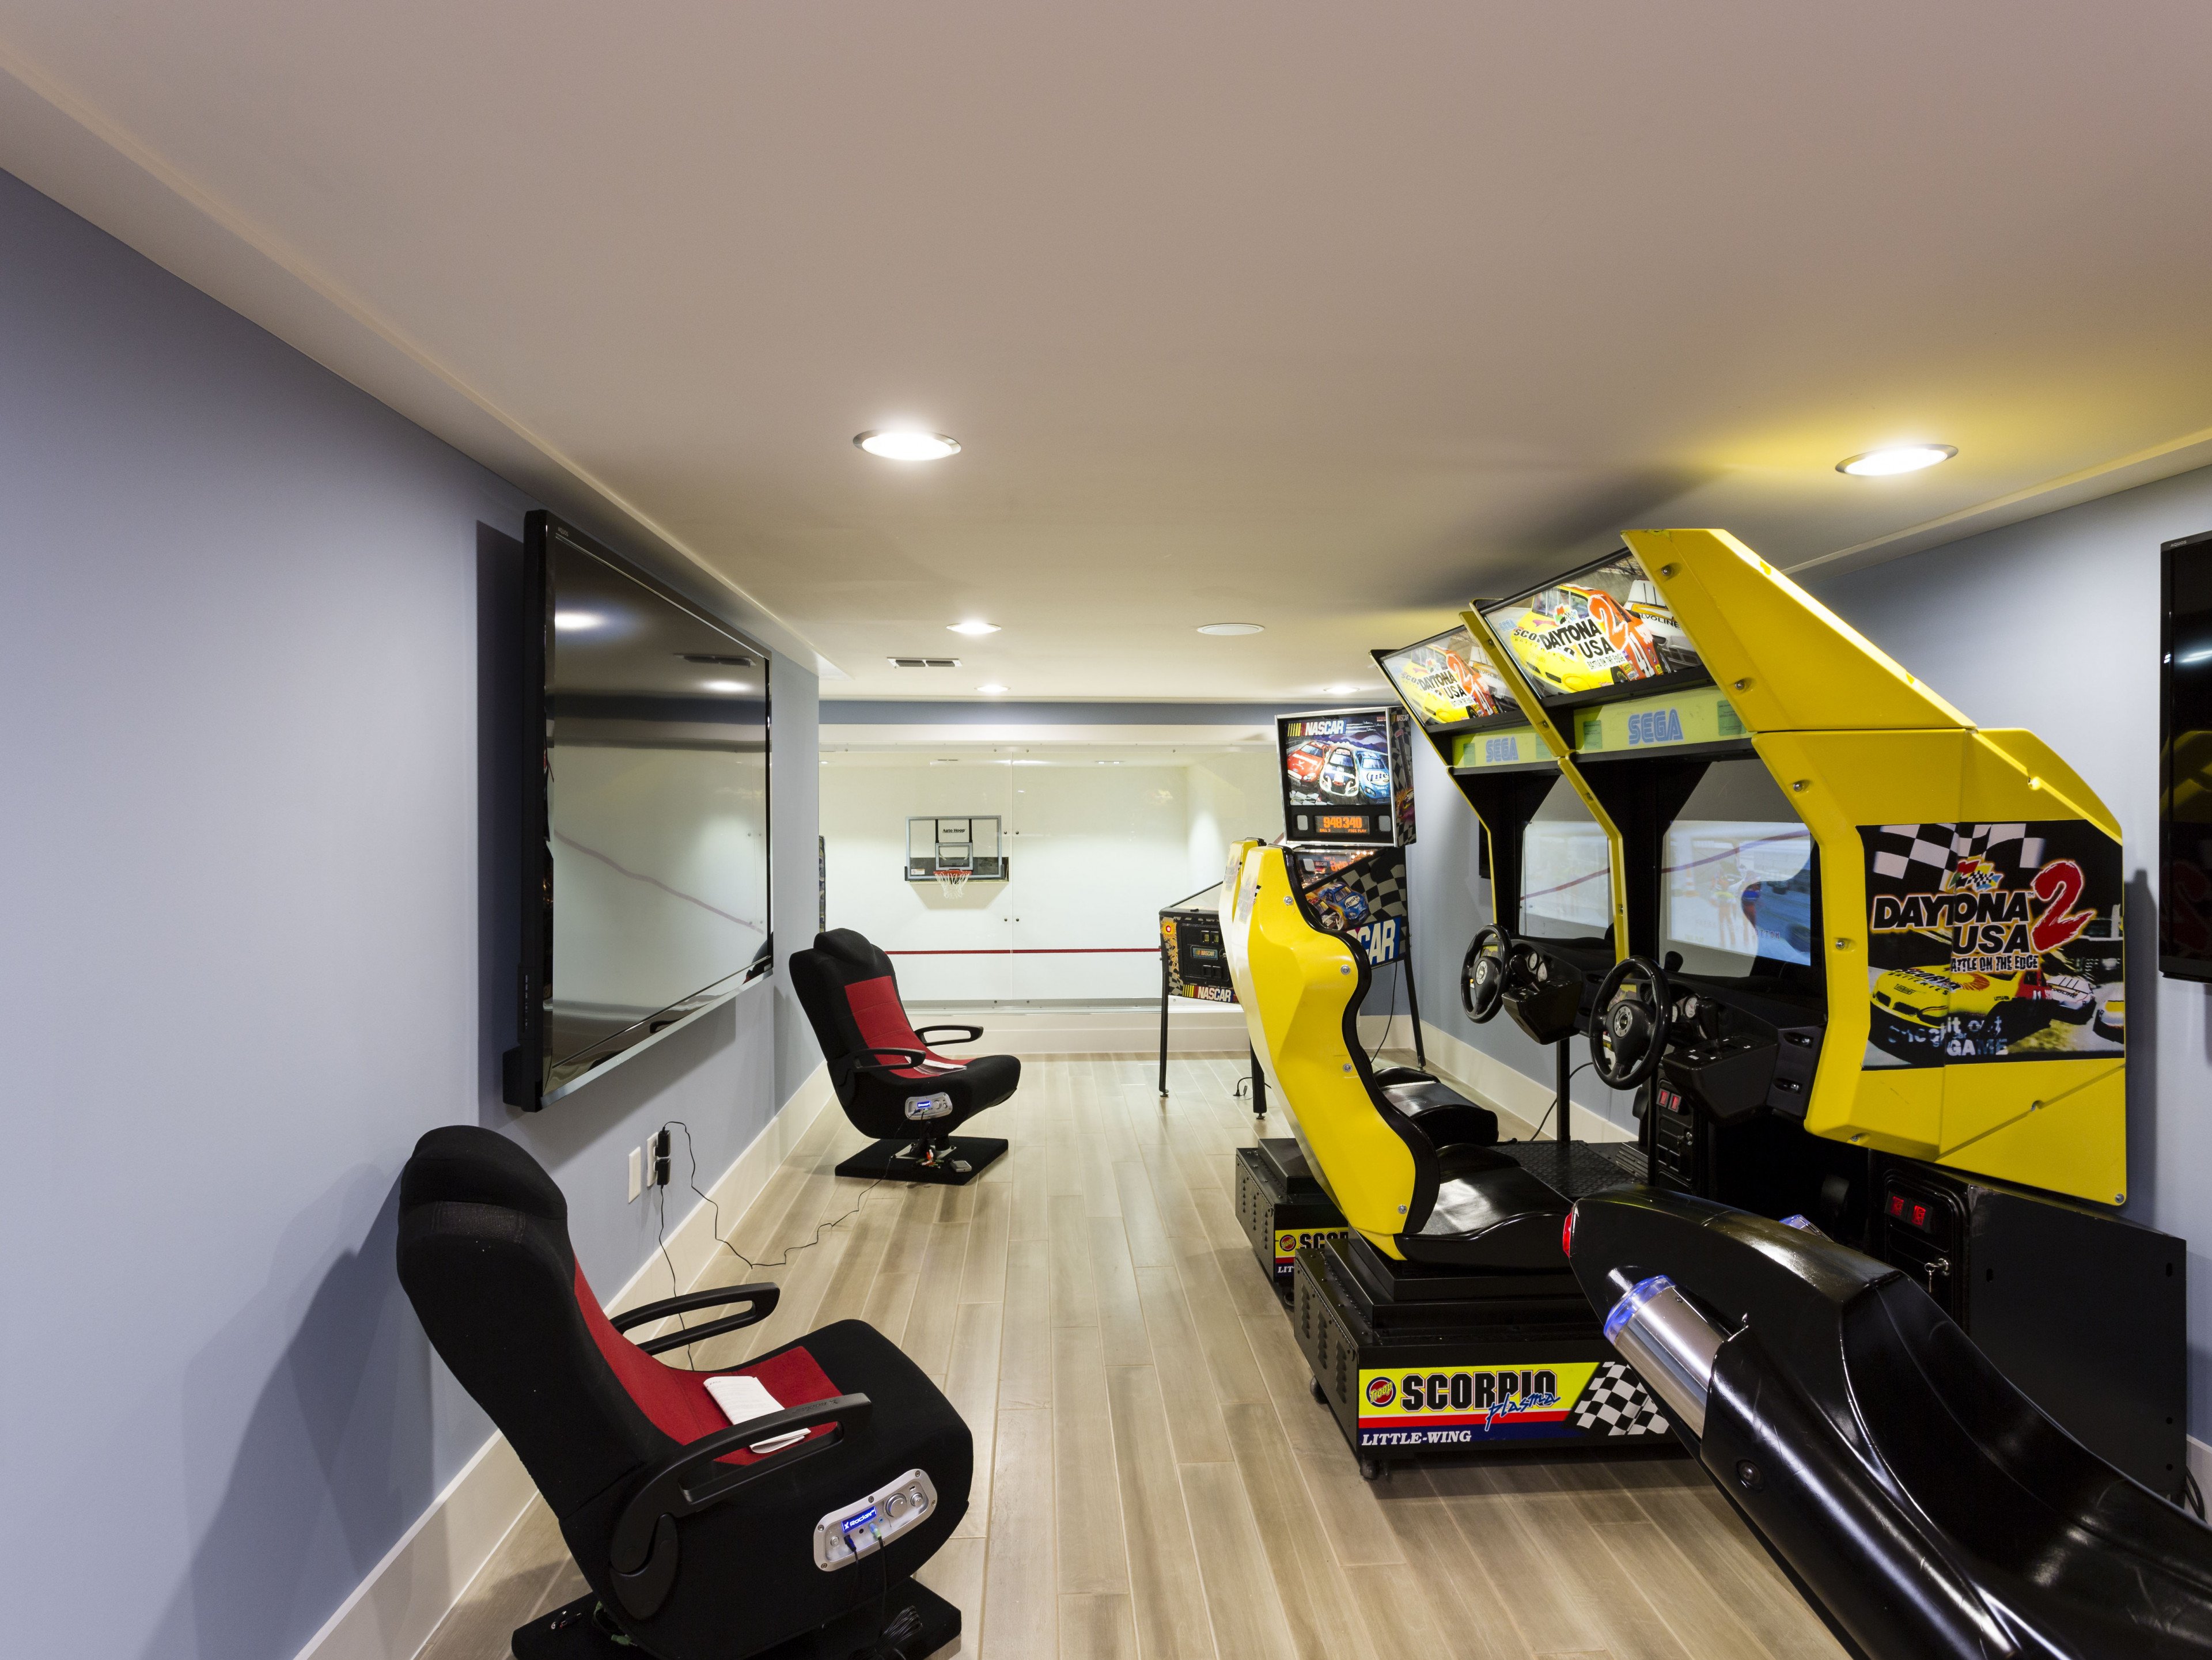 Reunion Resort 3000 vacation rental with basketball court and games room